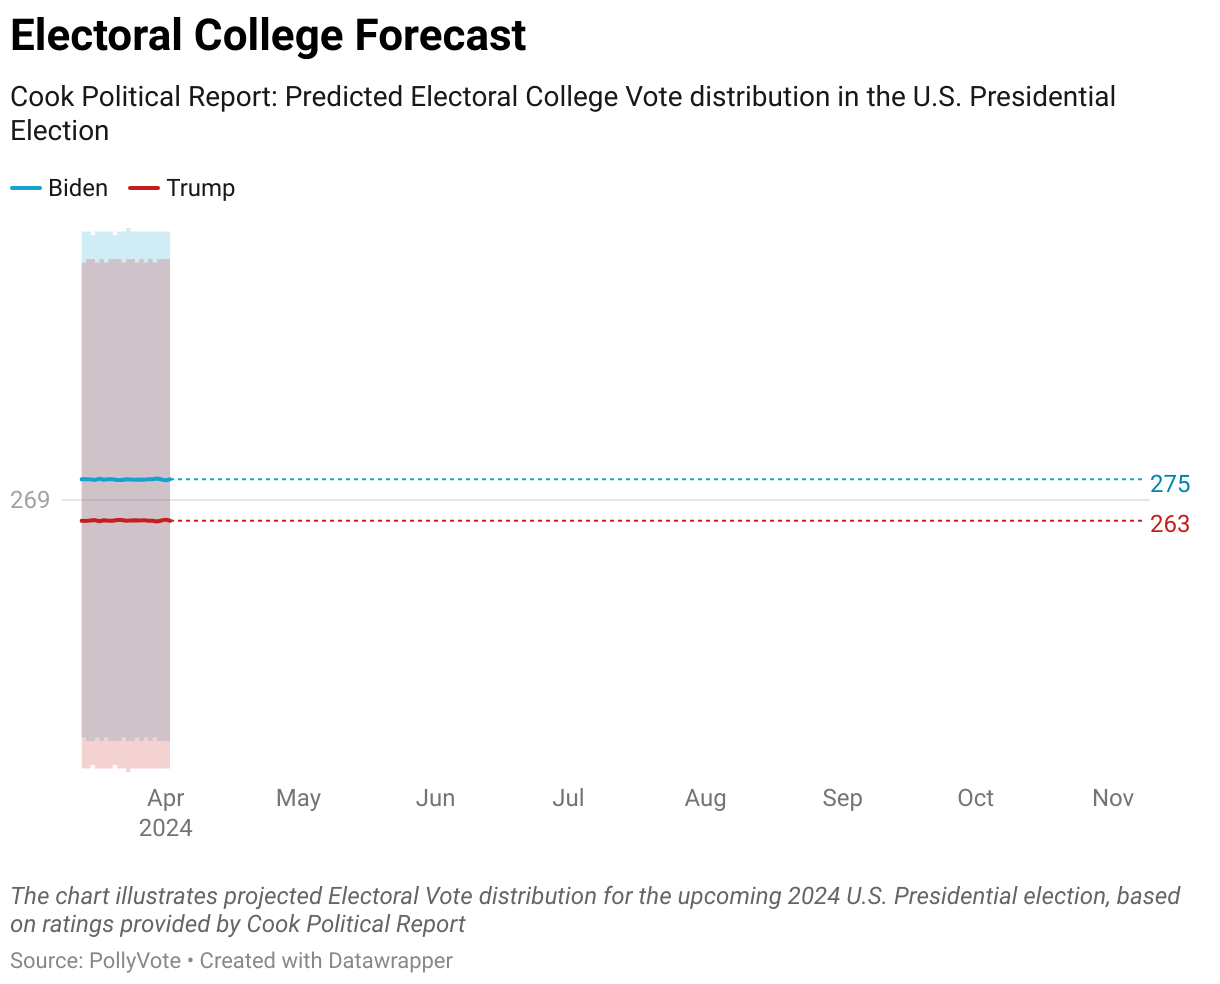 The chart illustrates projected Electoral Vote distribution for the upcoming 2024 U.S. Presidential election, based on ratings provided by Cook Political Report